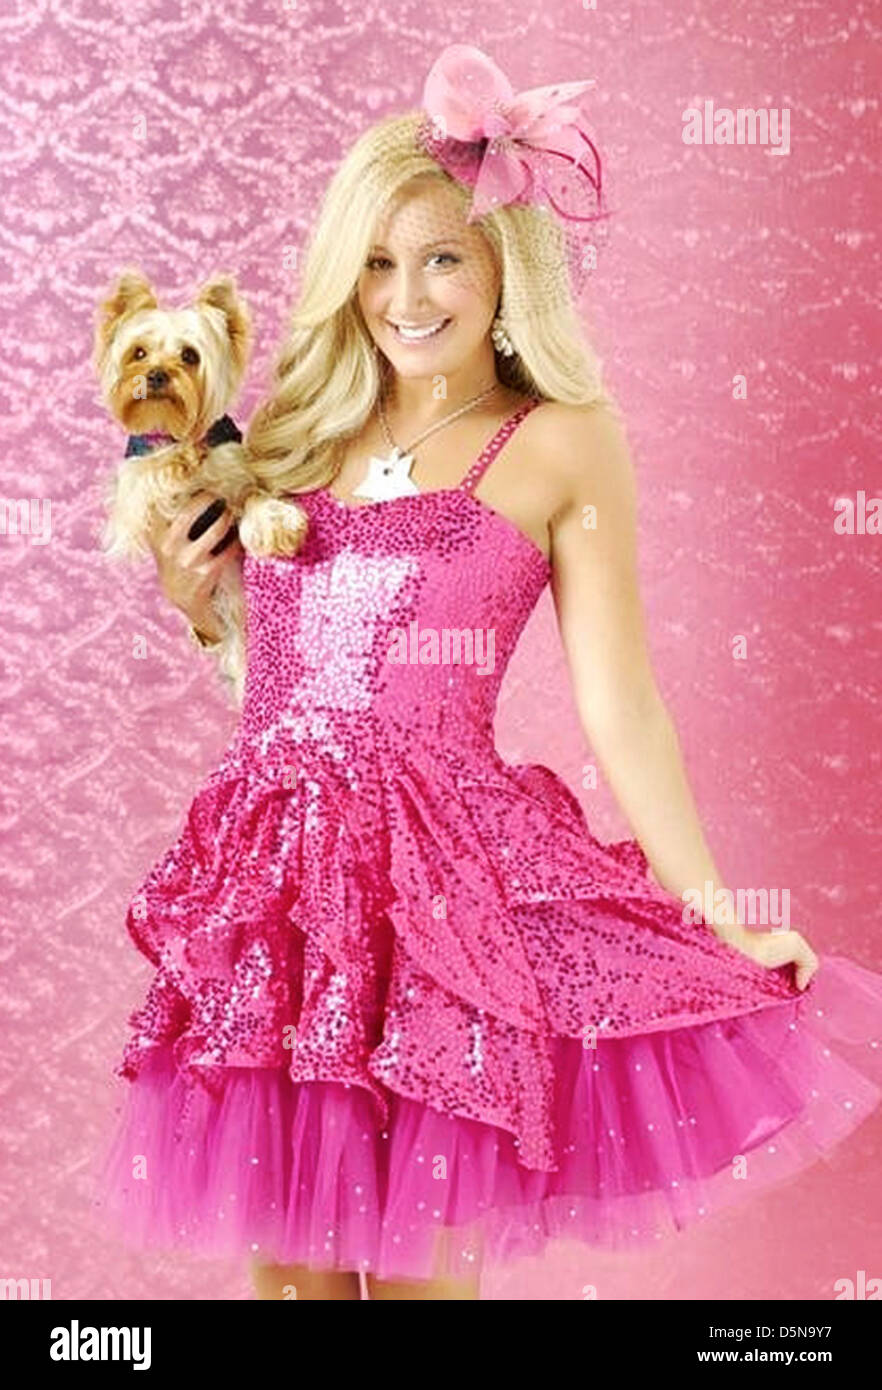 SHARPAY'S FABULOUS ADVENTURE 2011 Disney Channel film with Ashley Tisdale Stock Photo